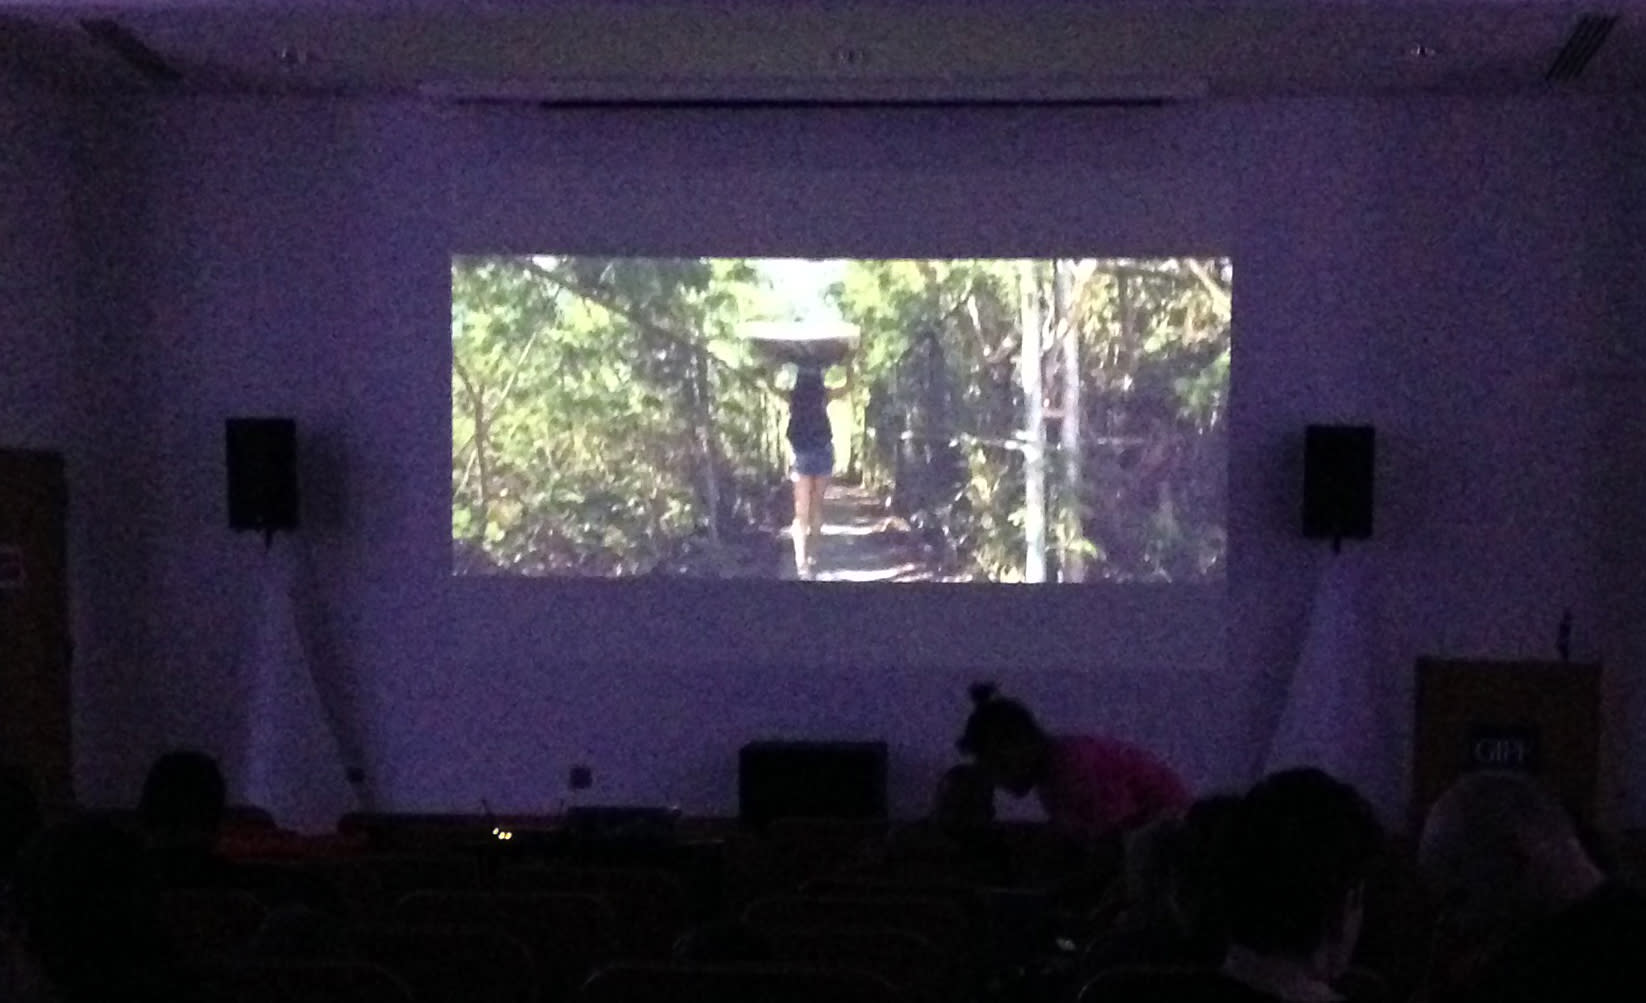 People watch one of the films shown at the UOG Film Festival